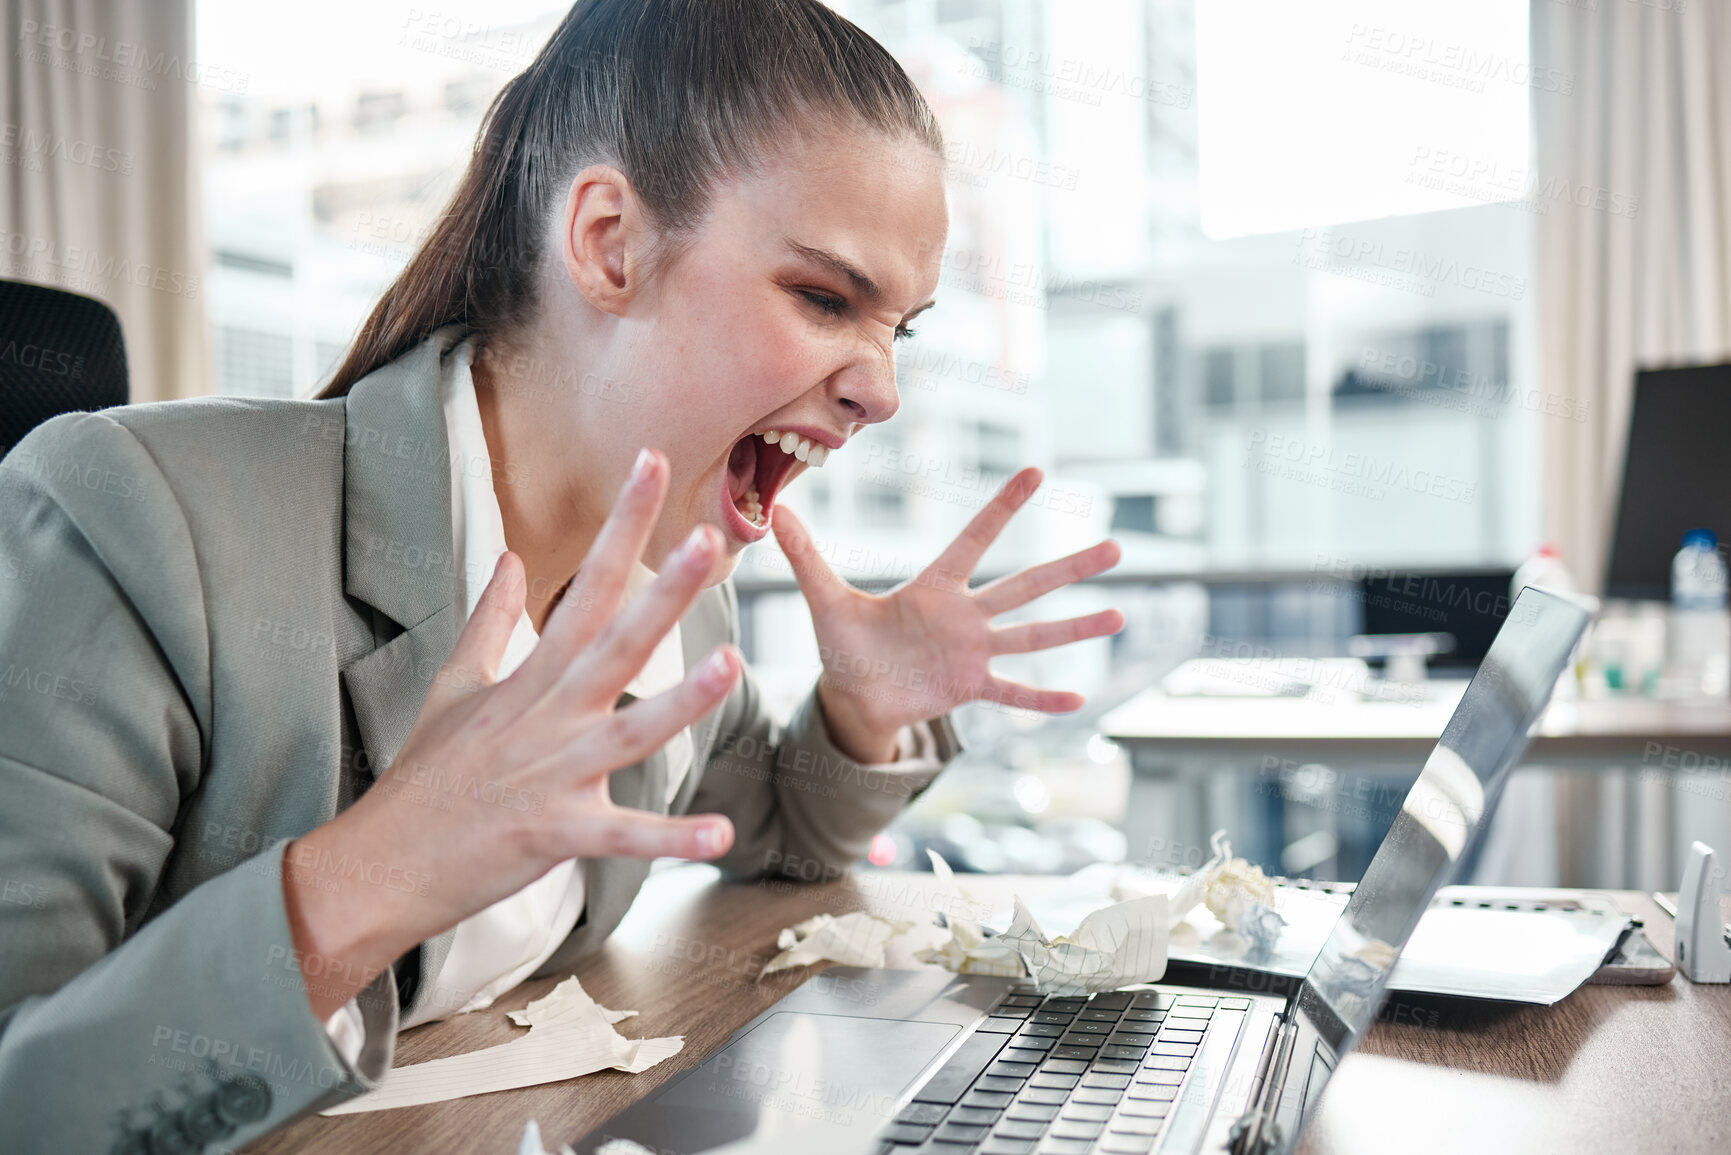 Buy stock photo Shot of a young businesswoman yelling while using a laptop in an office at work